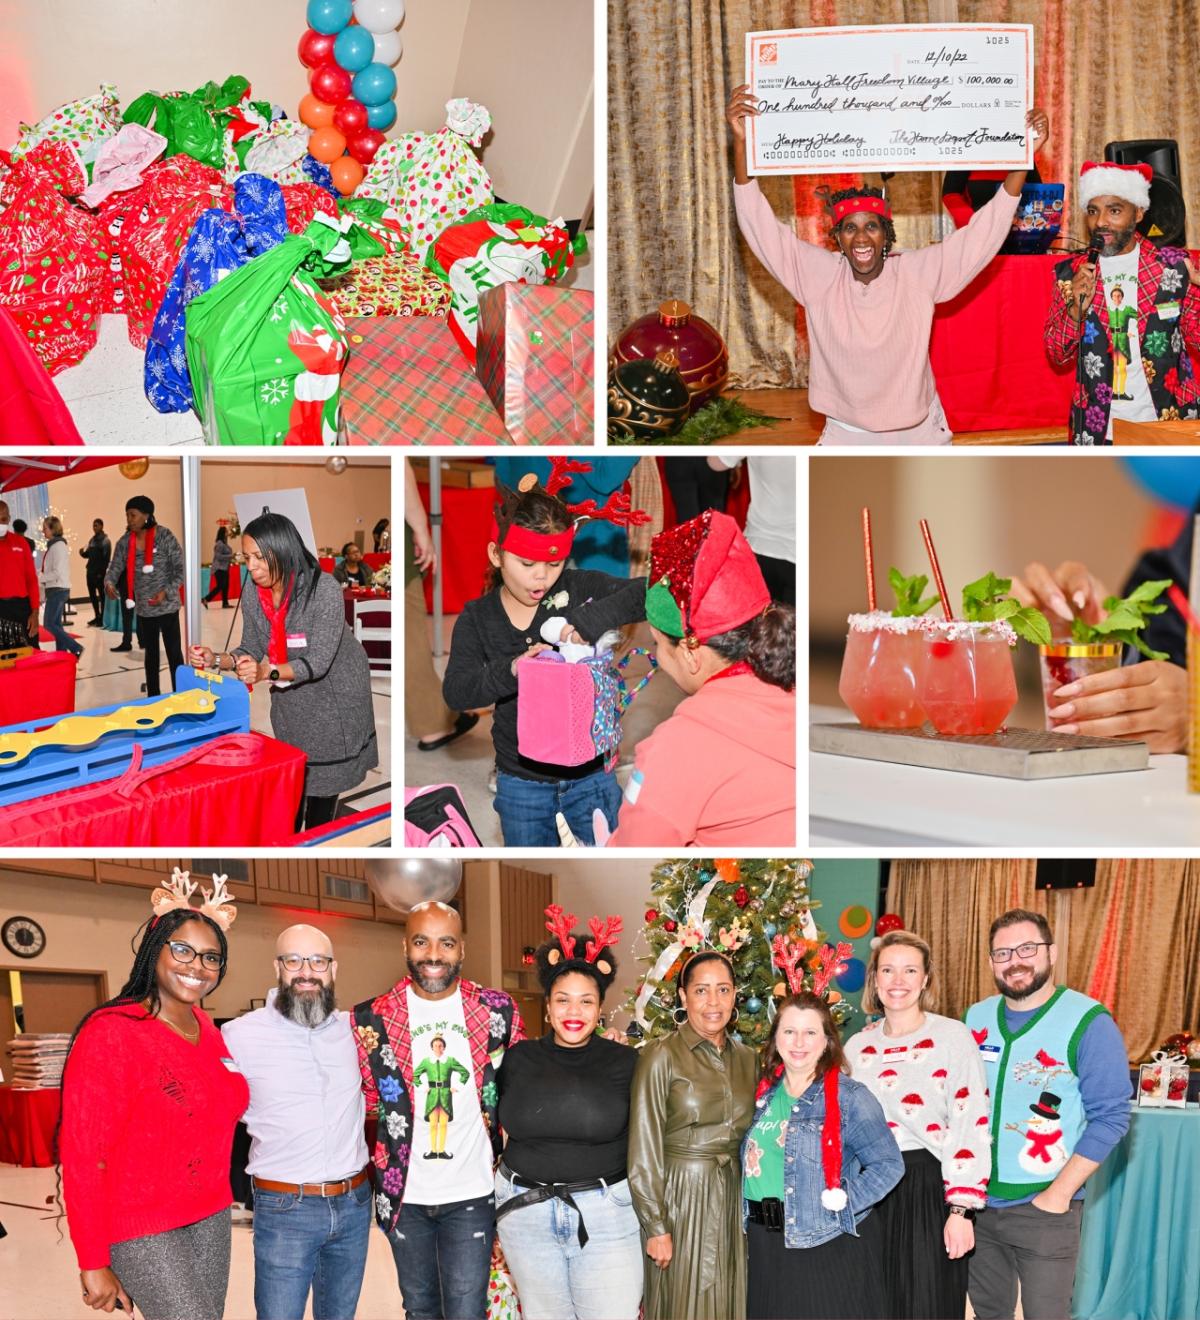 candids of festive donation party